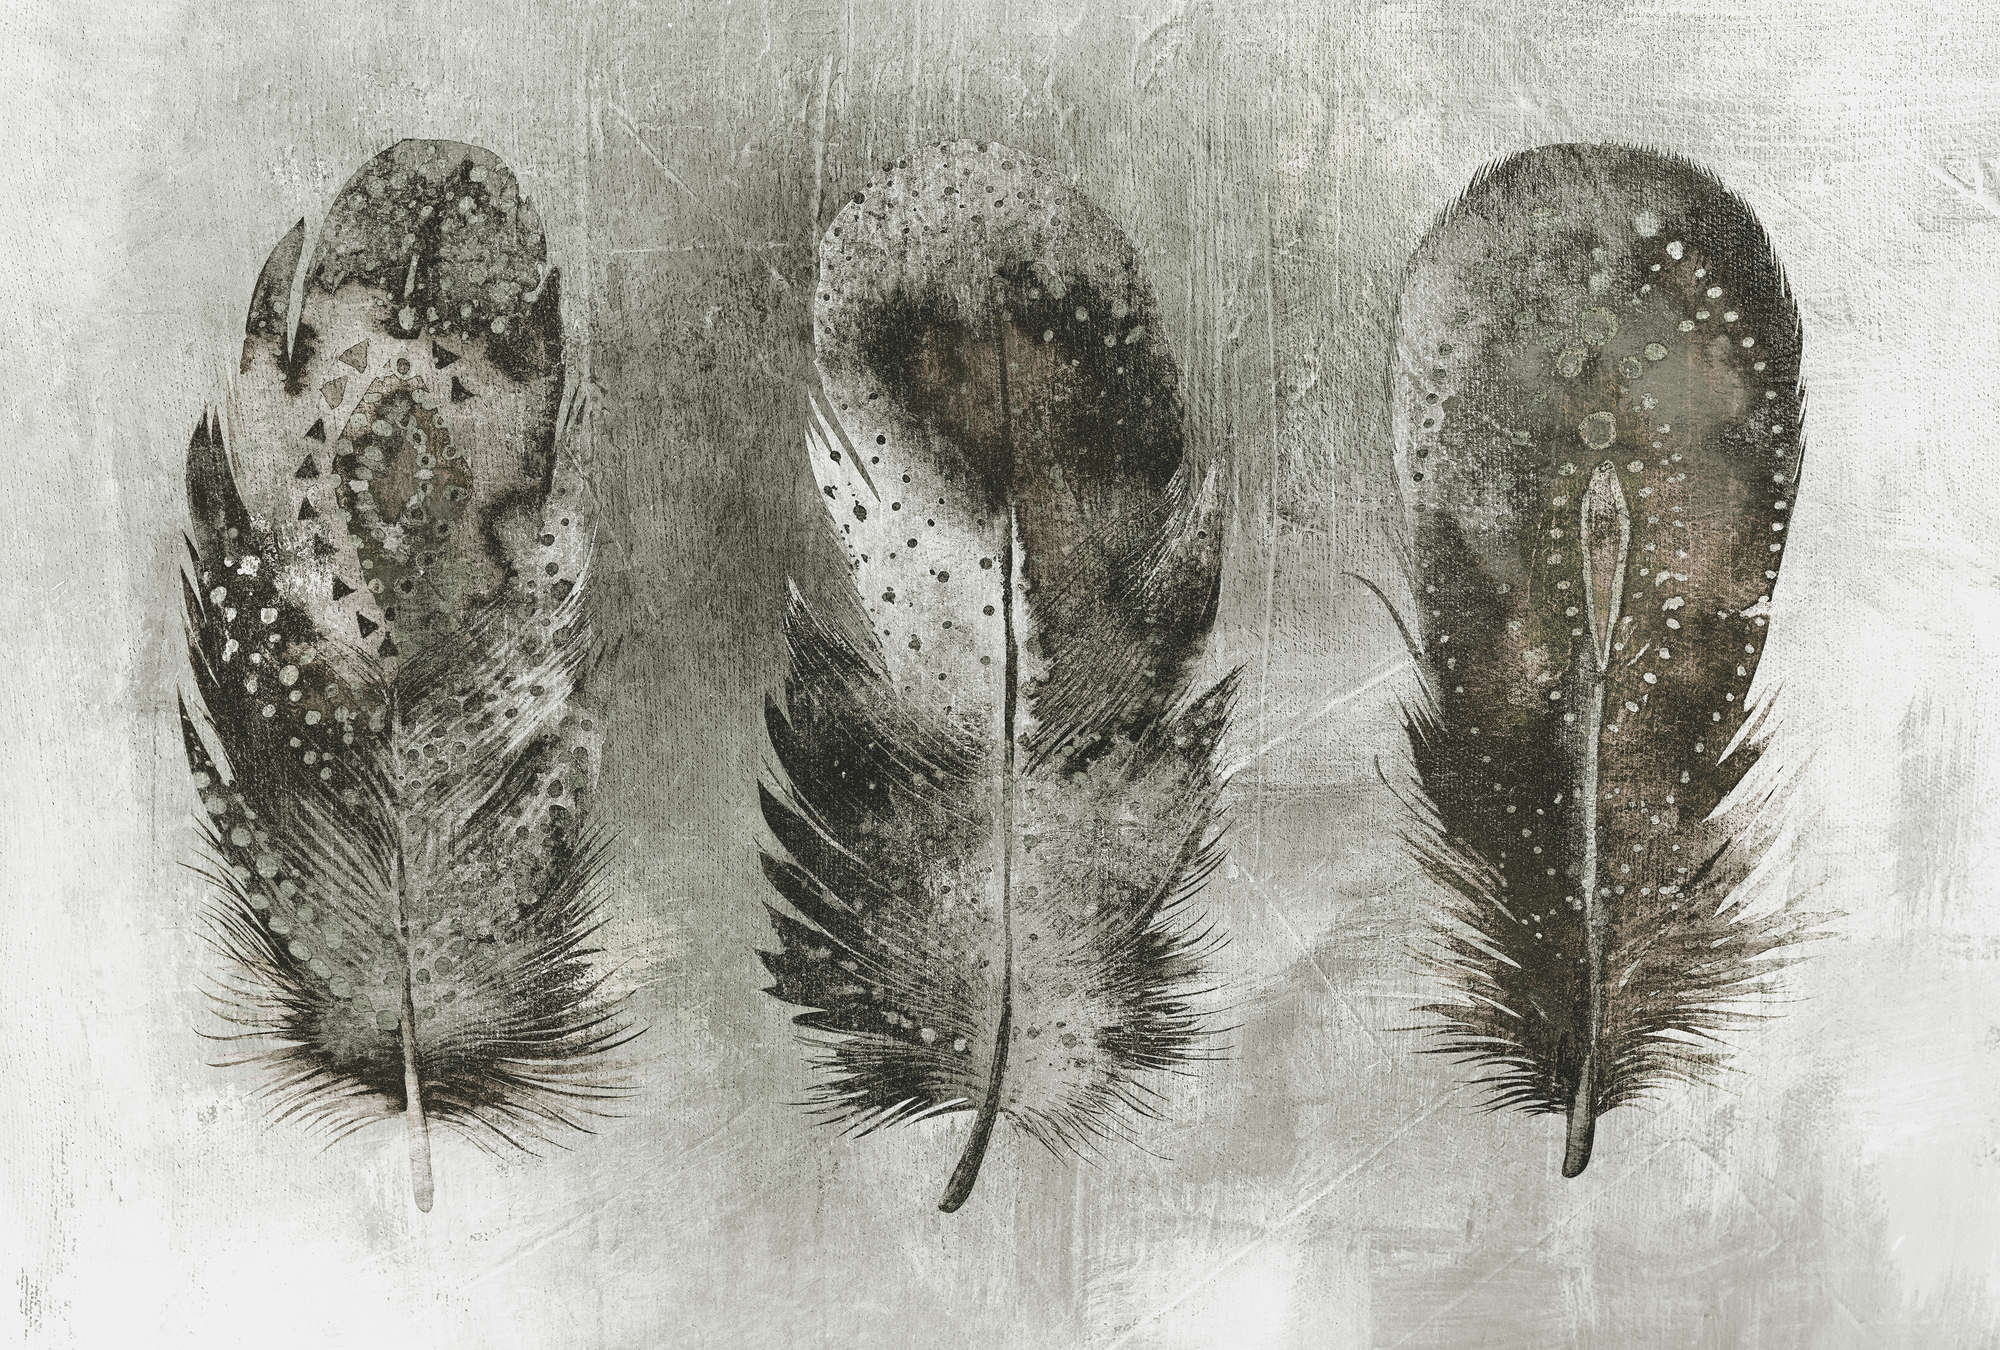             Black and white photo wallpaper, feathers in bohemian style - grey, white, black
        